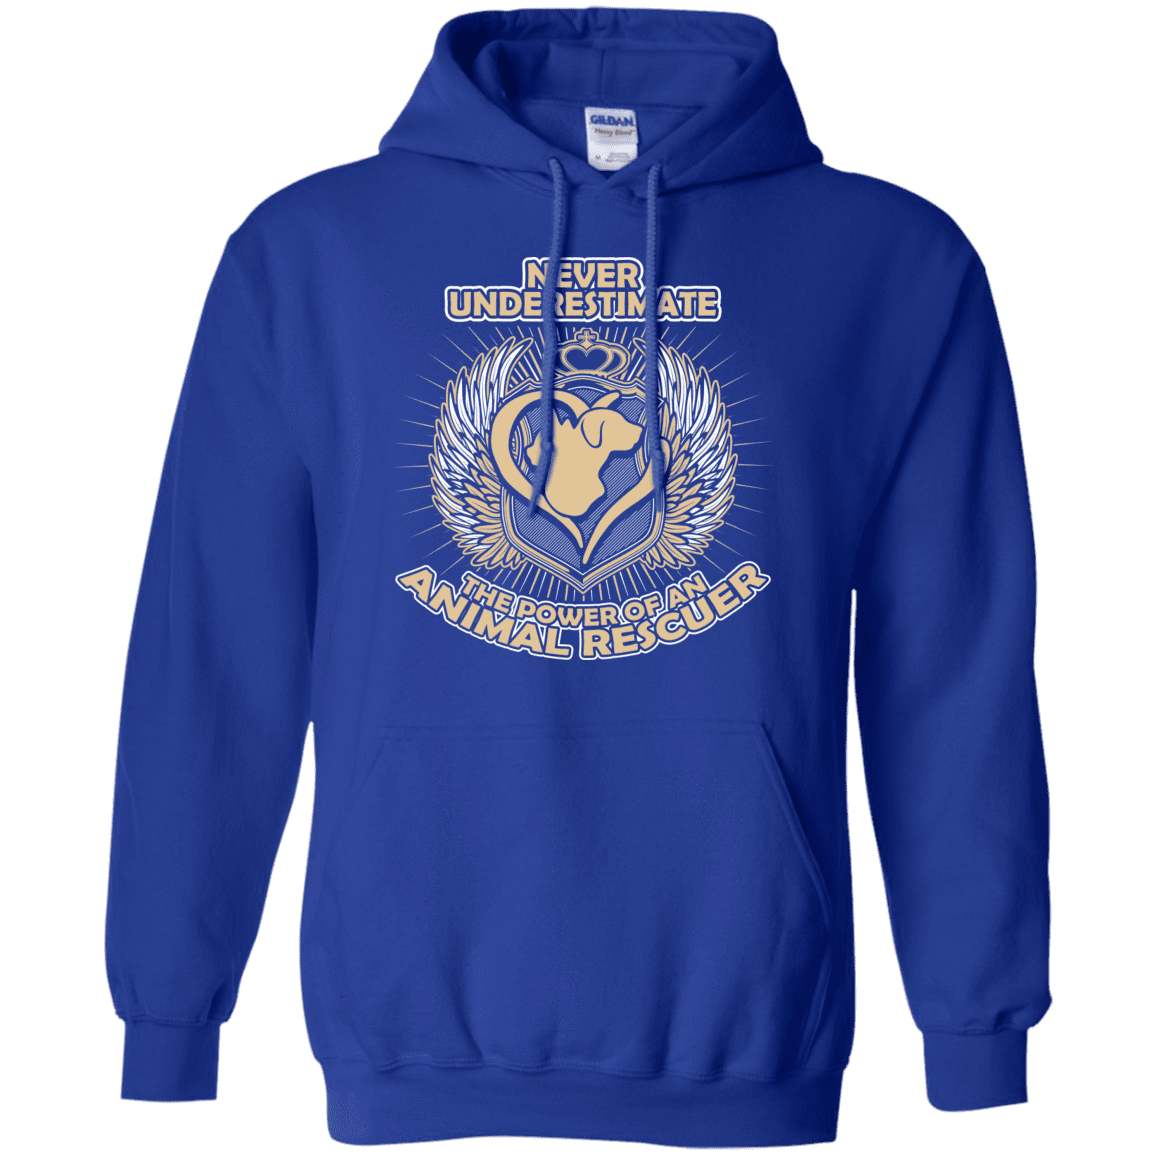 Power Of An Animal Rescuer - Hoodie.